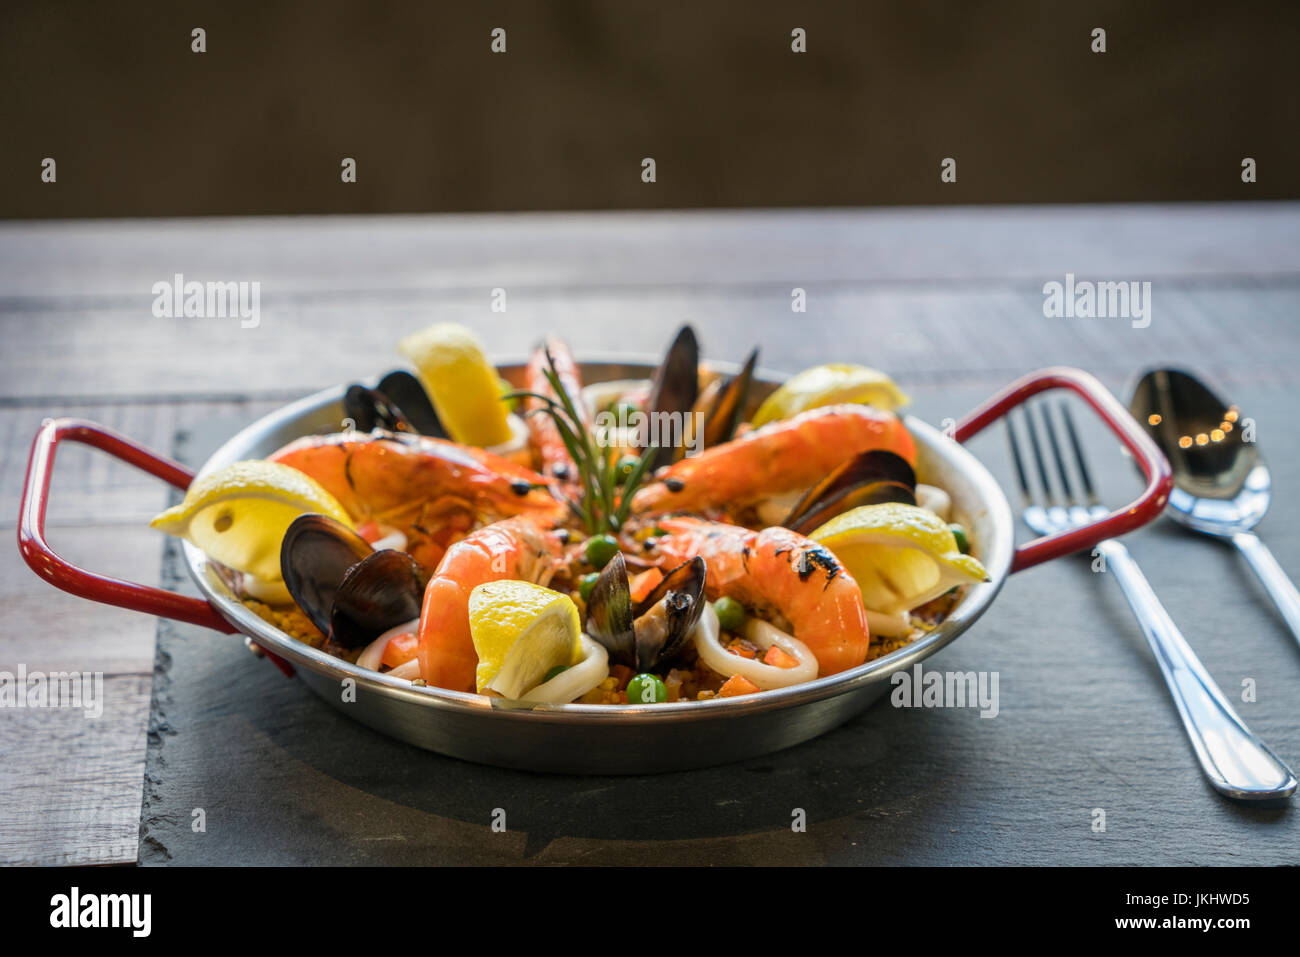 Paella with seafood vegetables and saffron served in the traditional pan Stock Photo